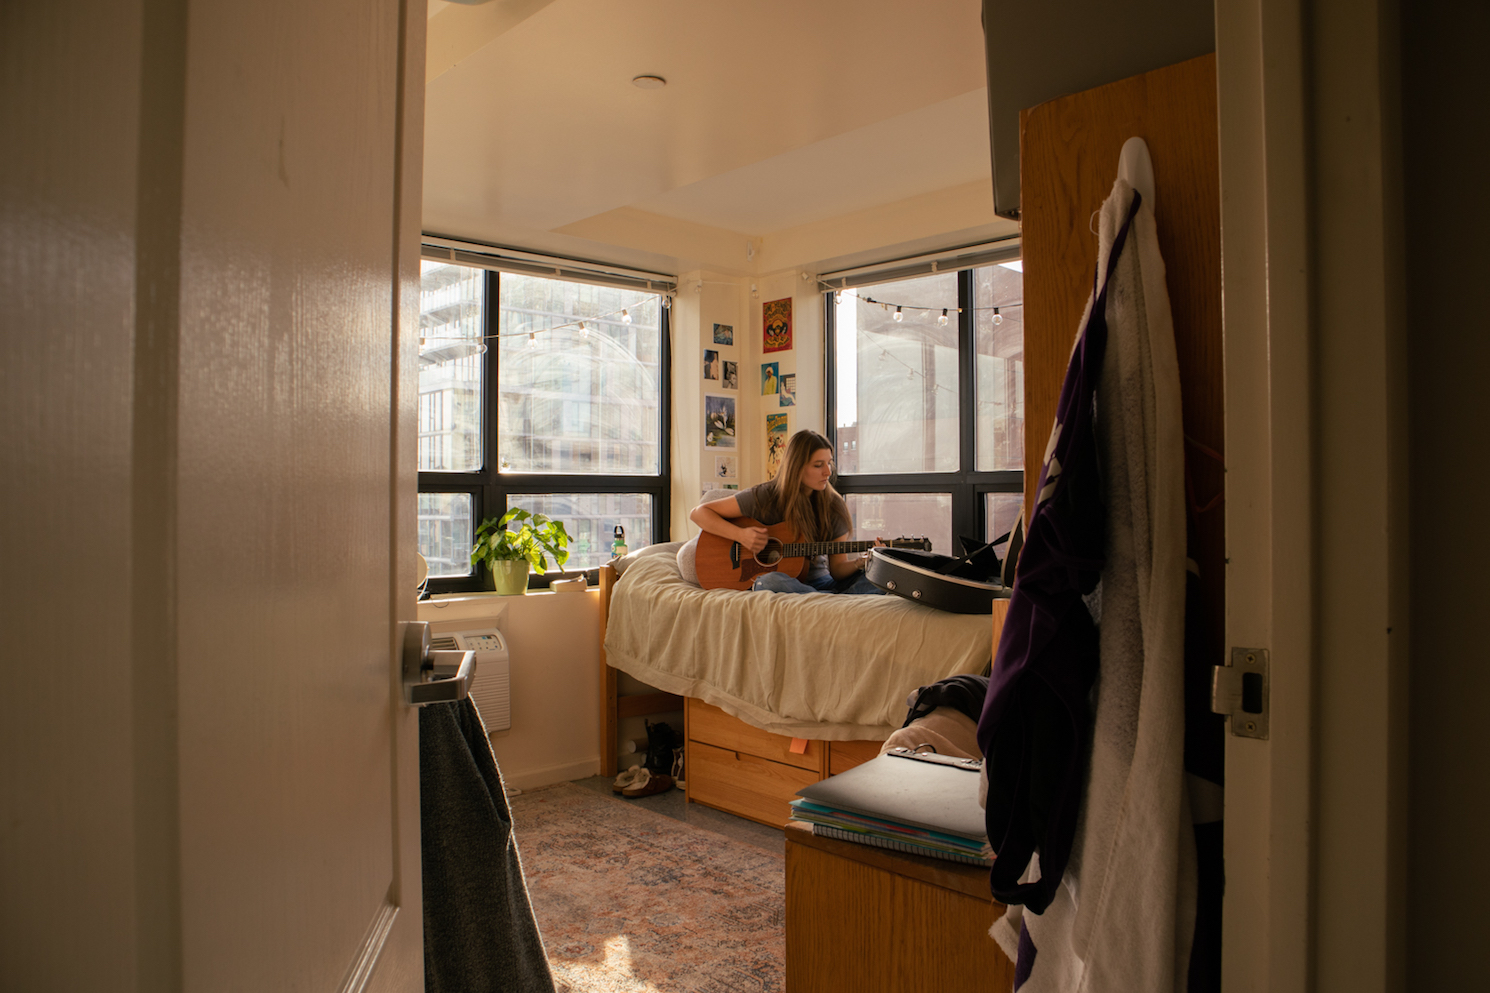 A girl sitting on a dorm bed playing a guitar.